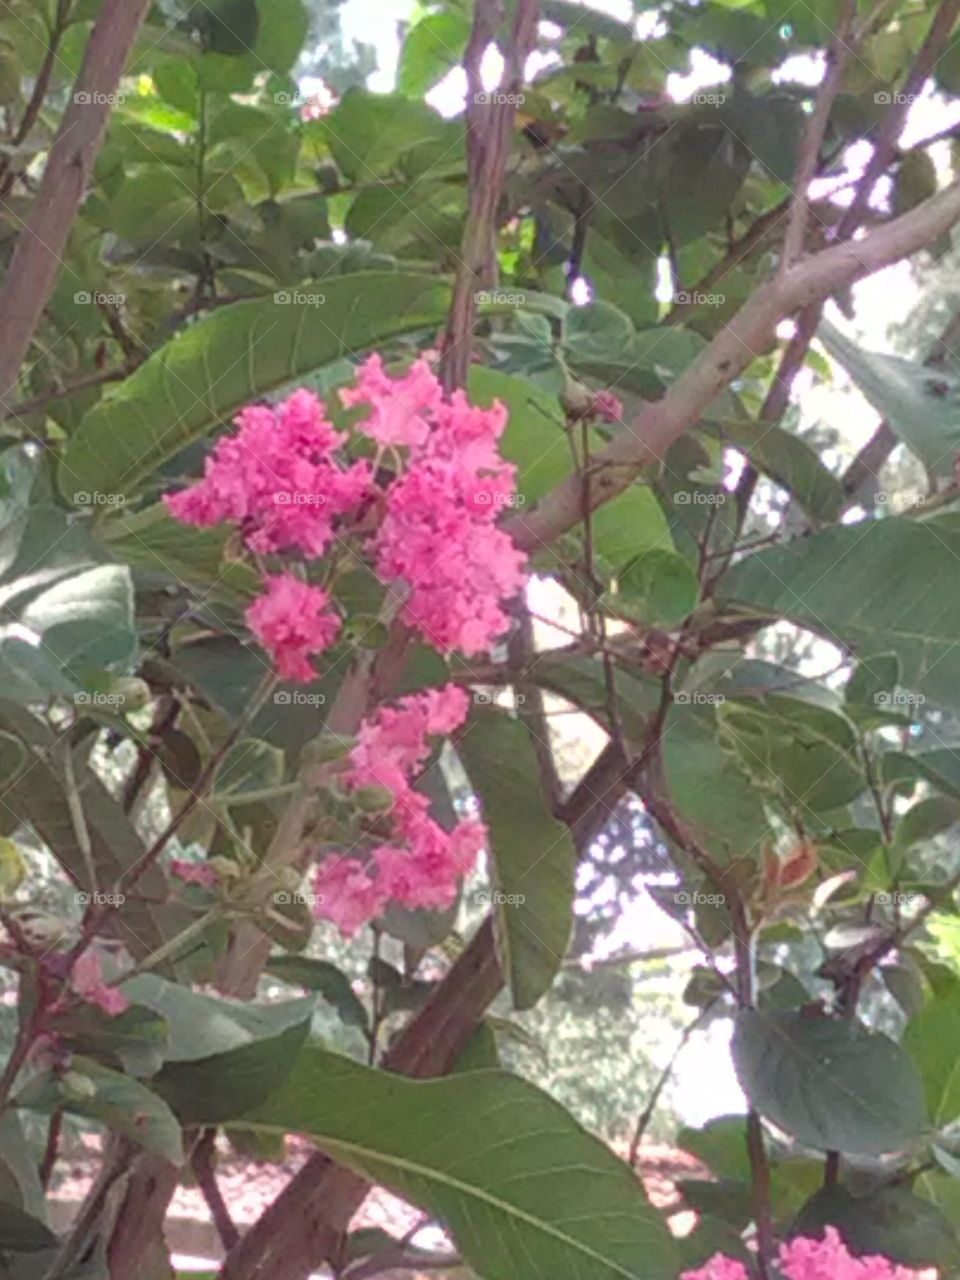 This is a very beautiful pink flower she is called कागज फूल.